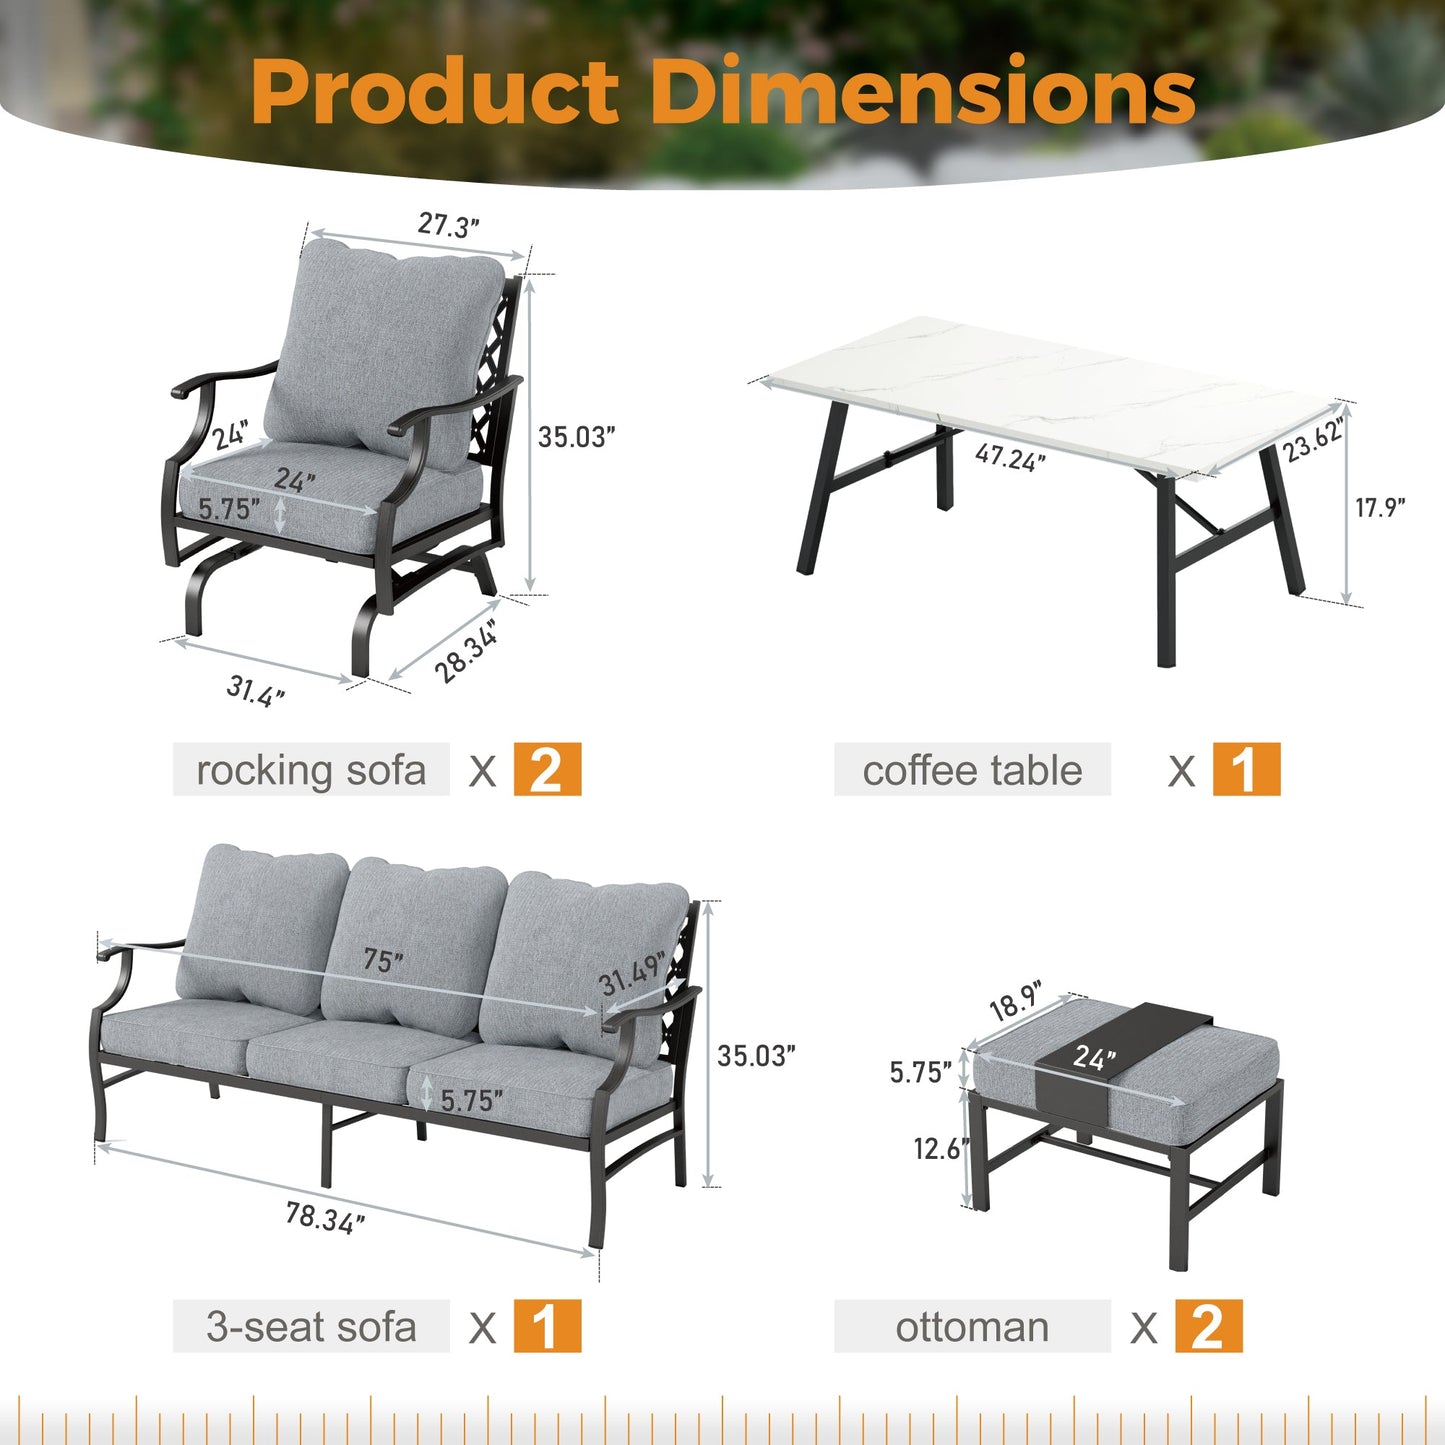 Sophia&William 7 Seat Patio Conversation Set Outdoor Sofa Furniture Set with Marble Table & Ottomans, Gray